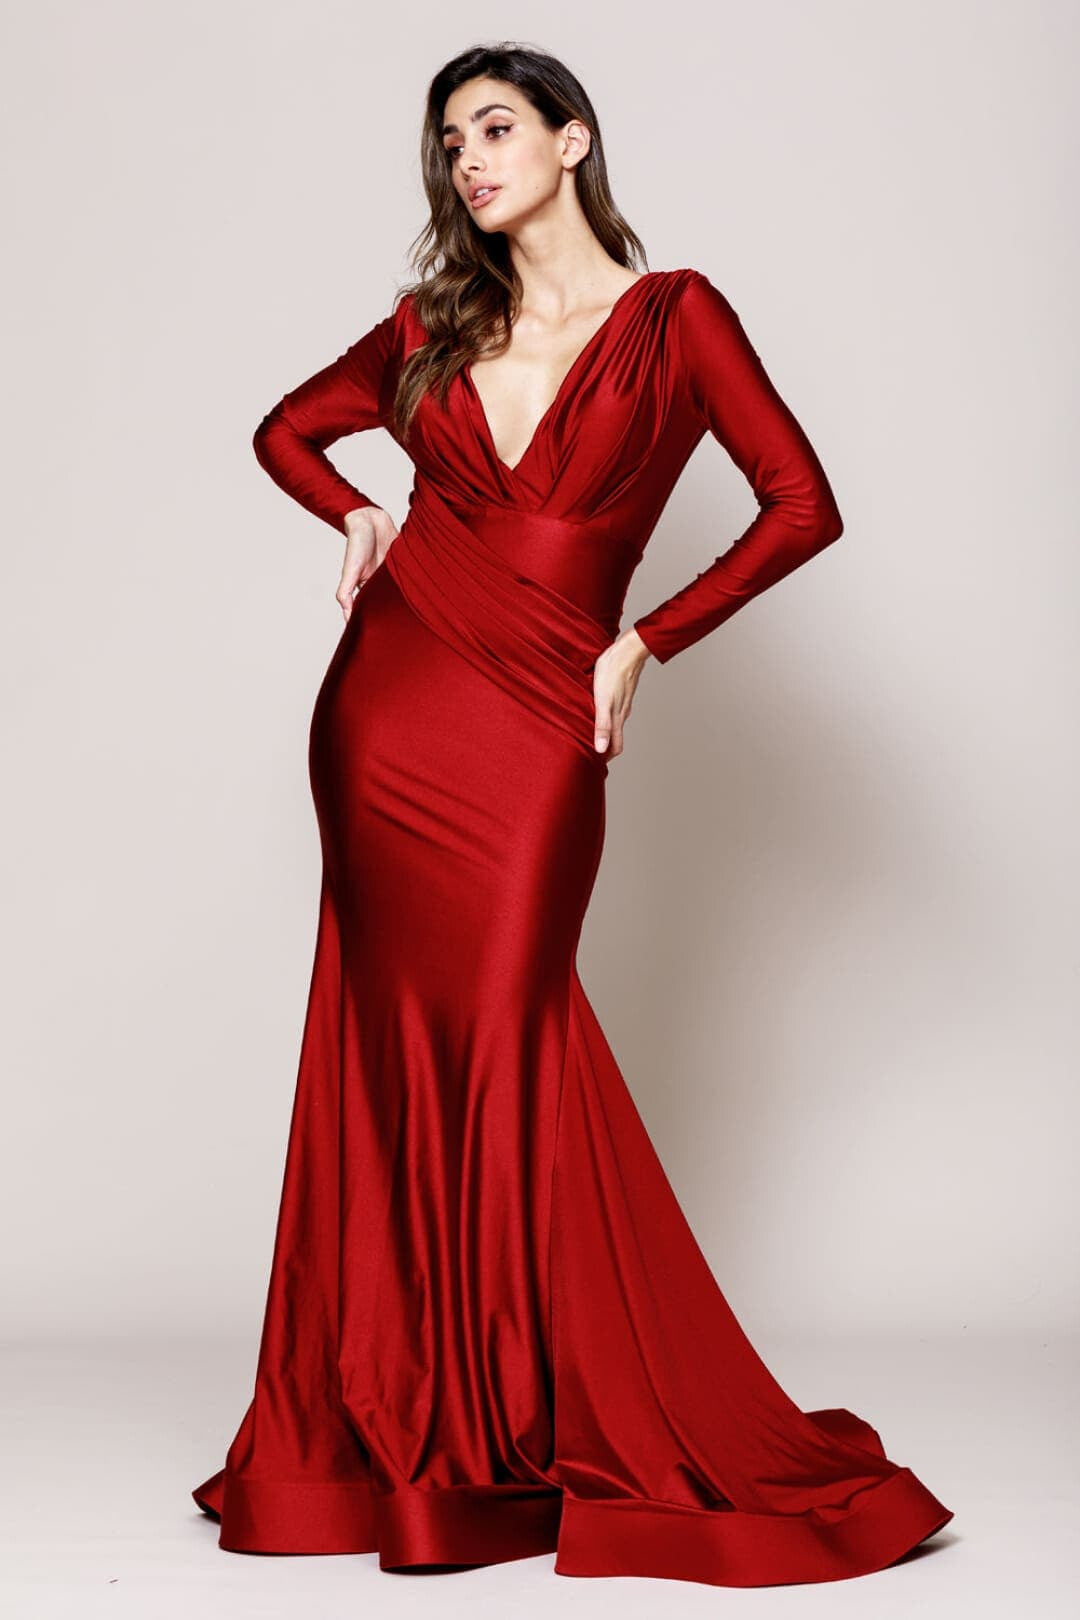 Stretchy Evening Prom Gown - BURGUNDY / 2